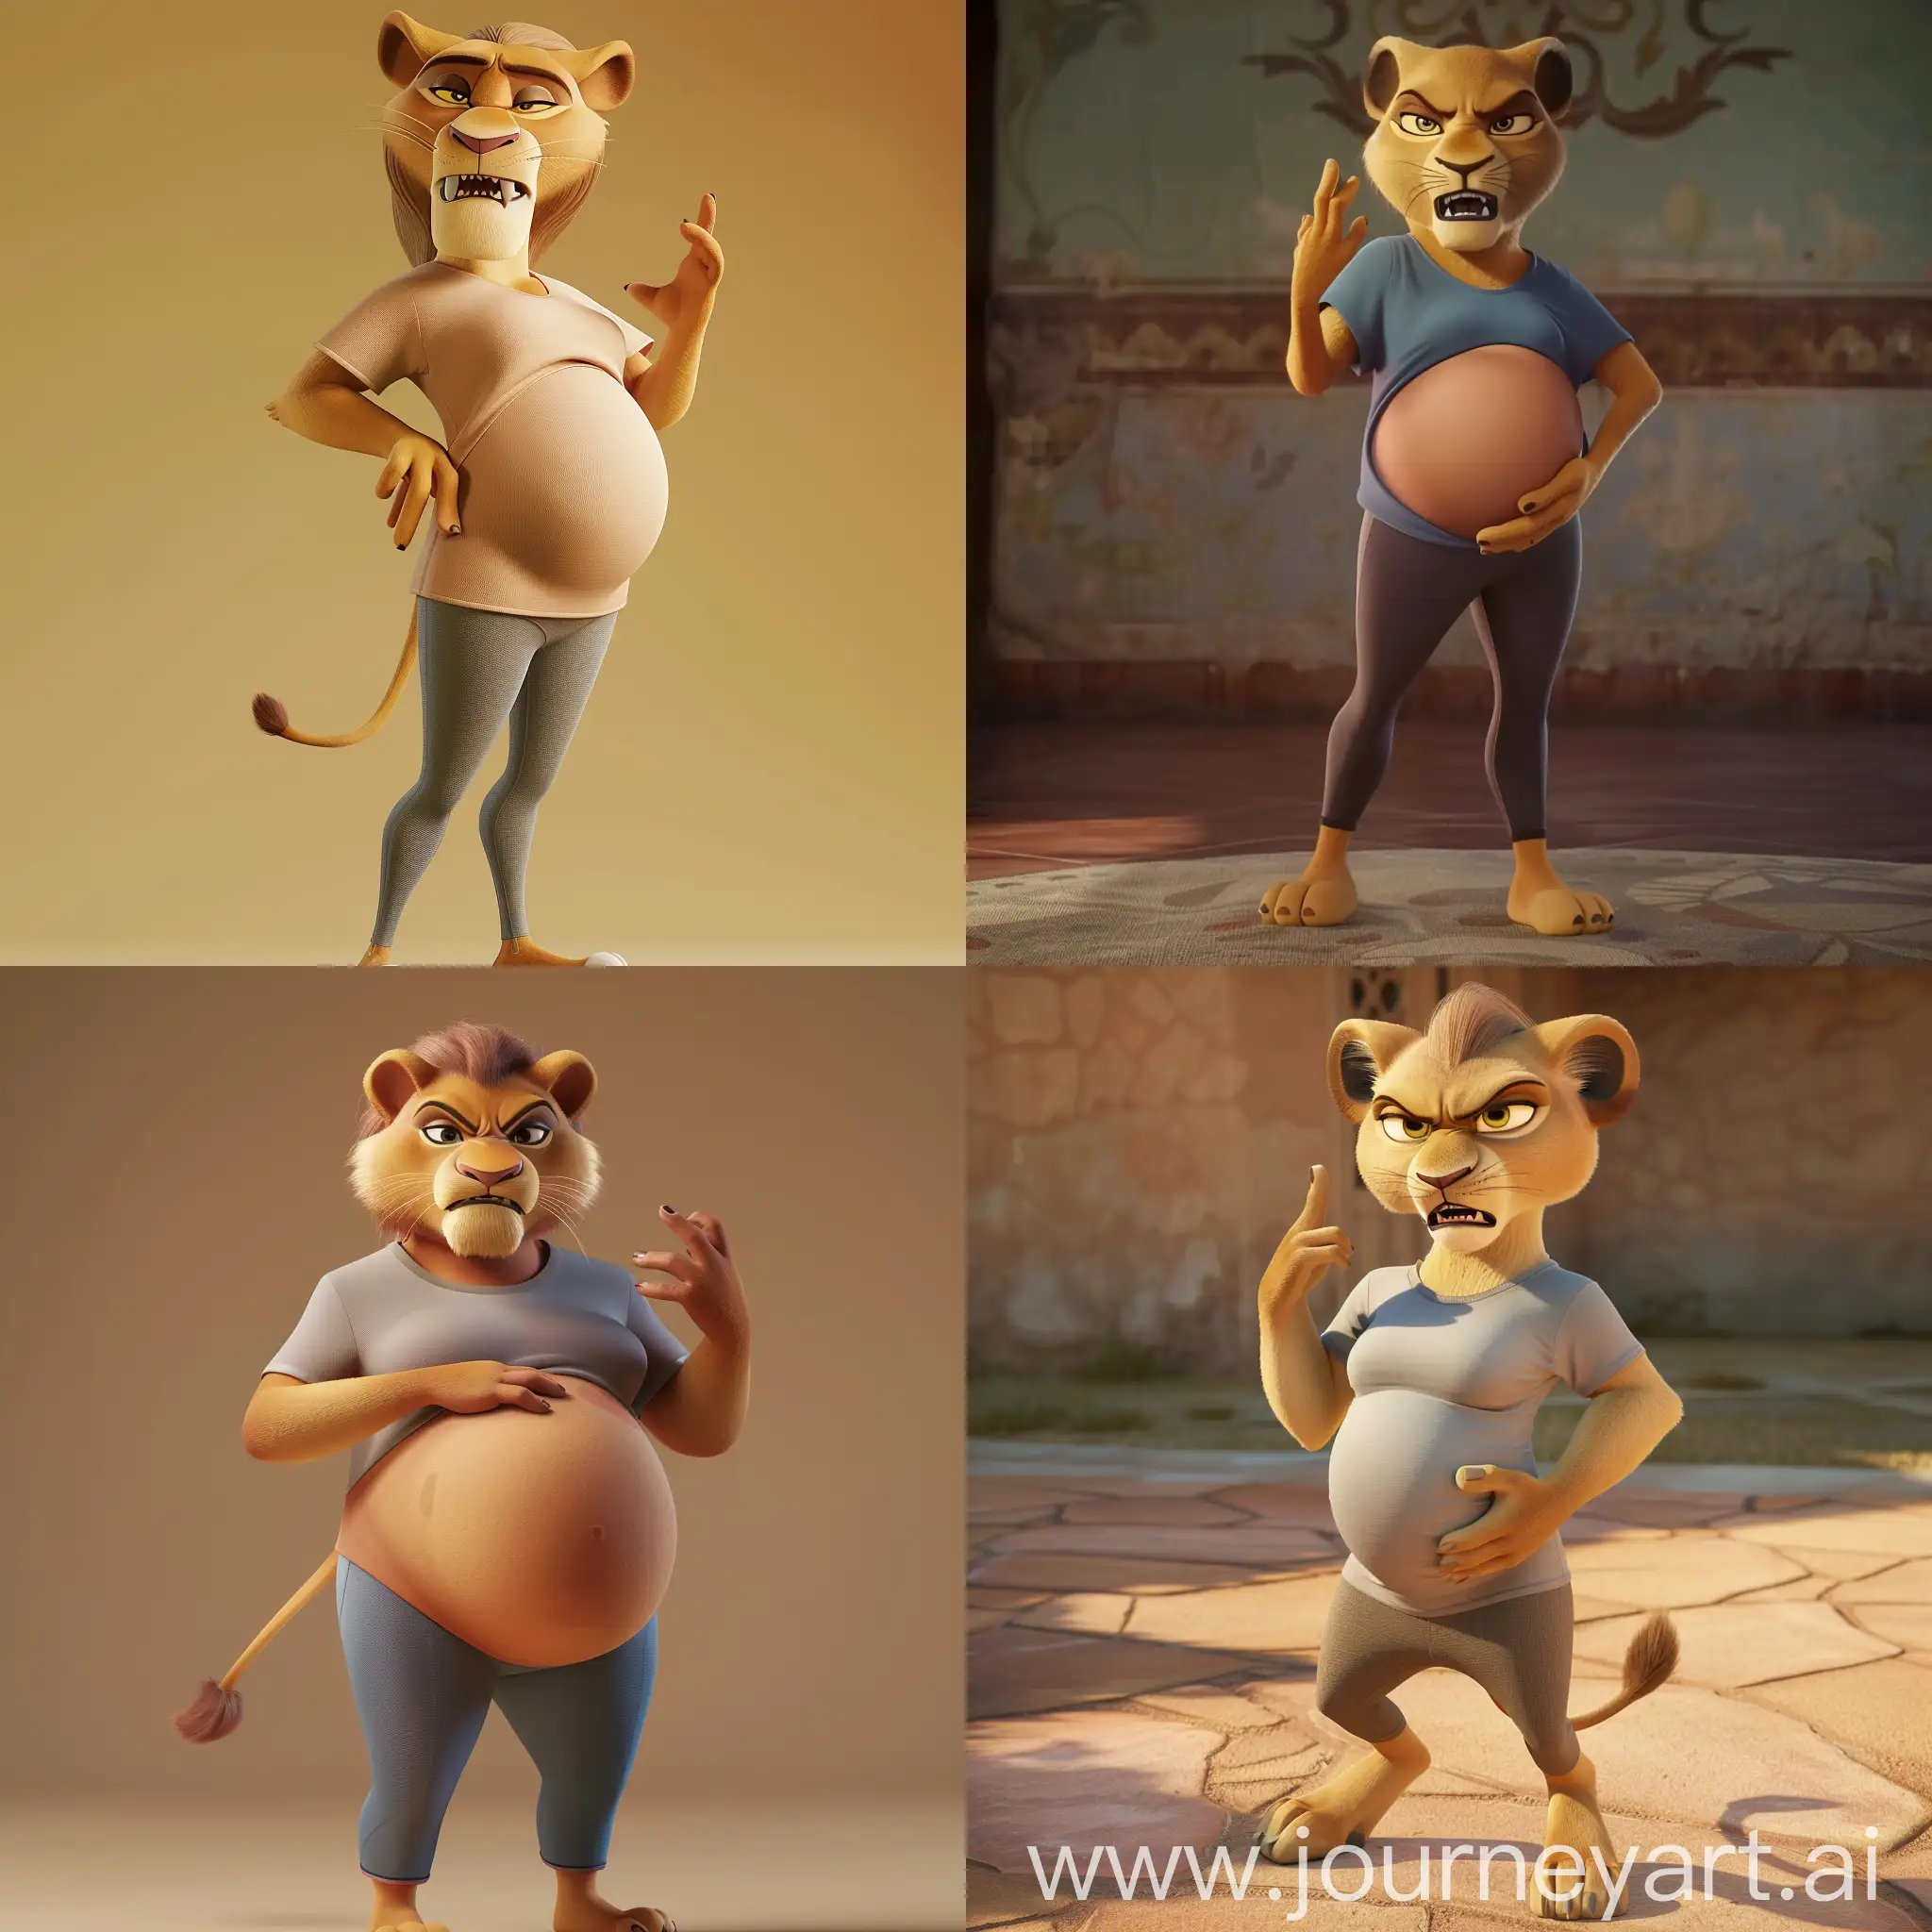 a pixar 3D animated film featuring a pregnant lioness woman wearing a t-shirt and leggings, looking angry at the camera, gesturing at her belly.